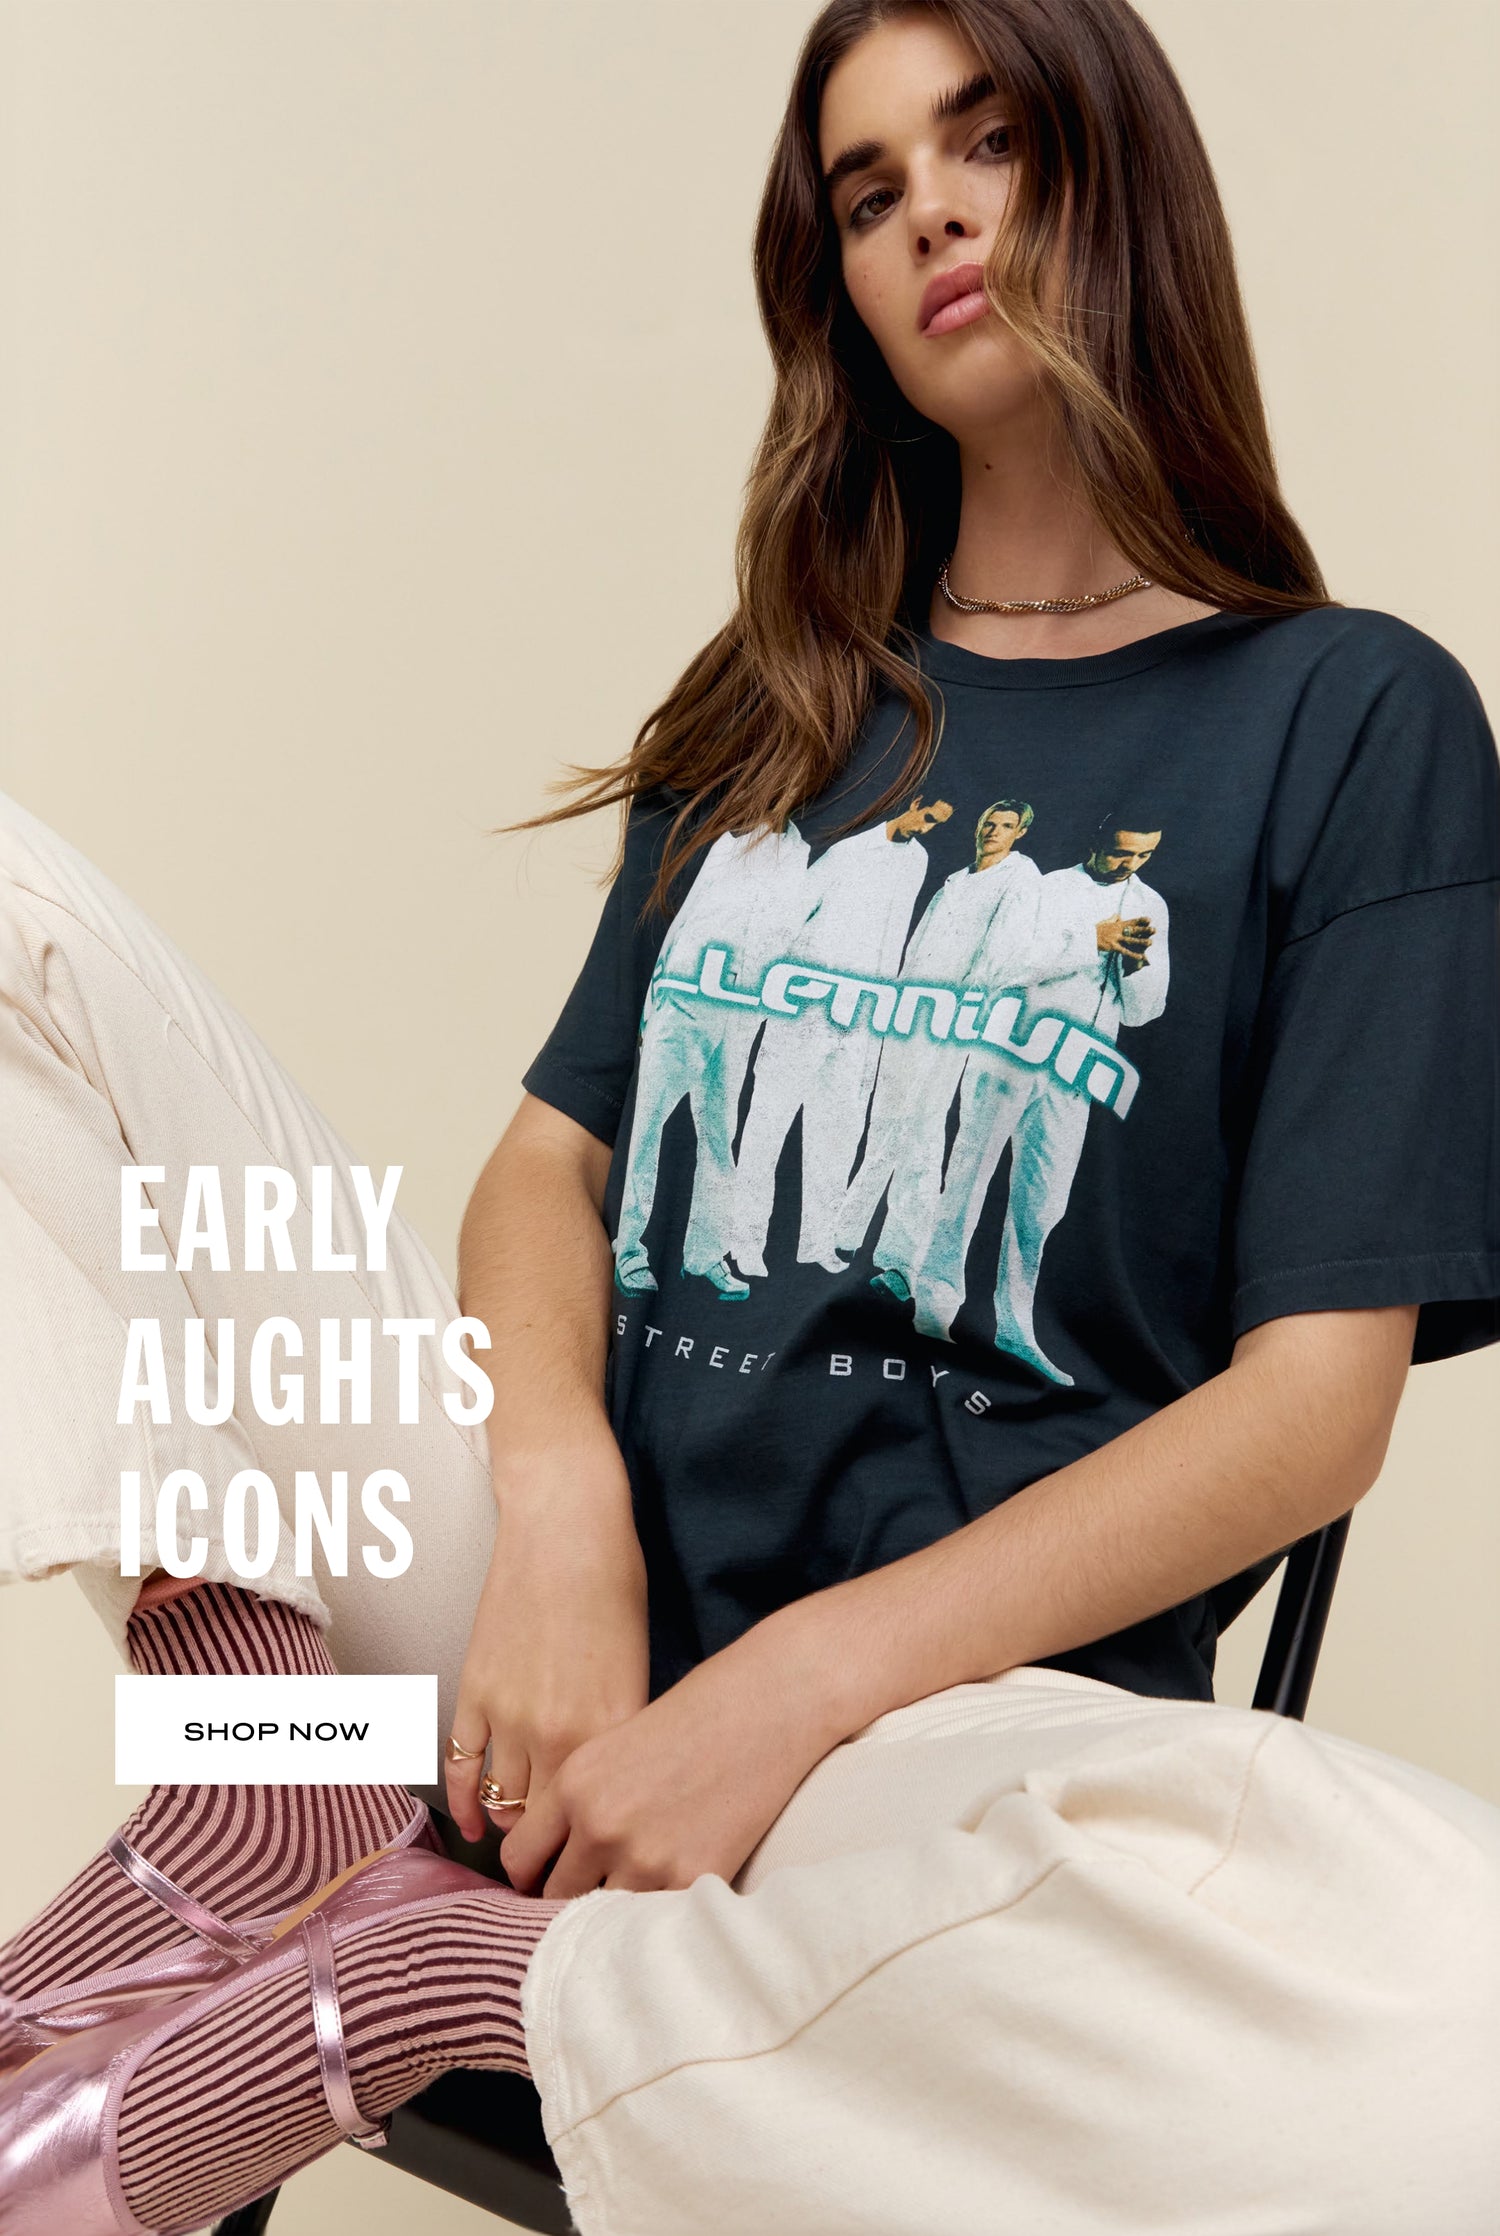 Early Aughts Icons - Shop Backstreet Boys and Britney Spears graphic tees at daydreamerla.com